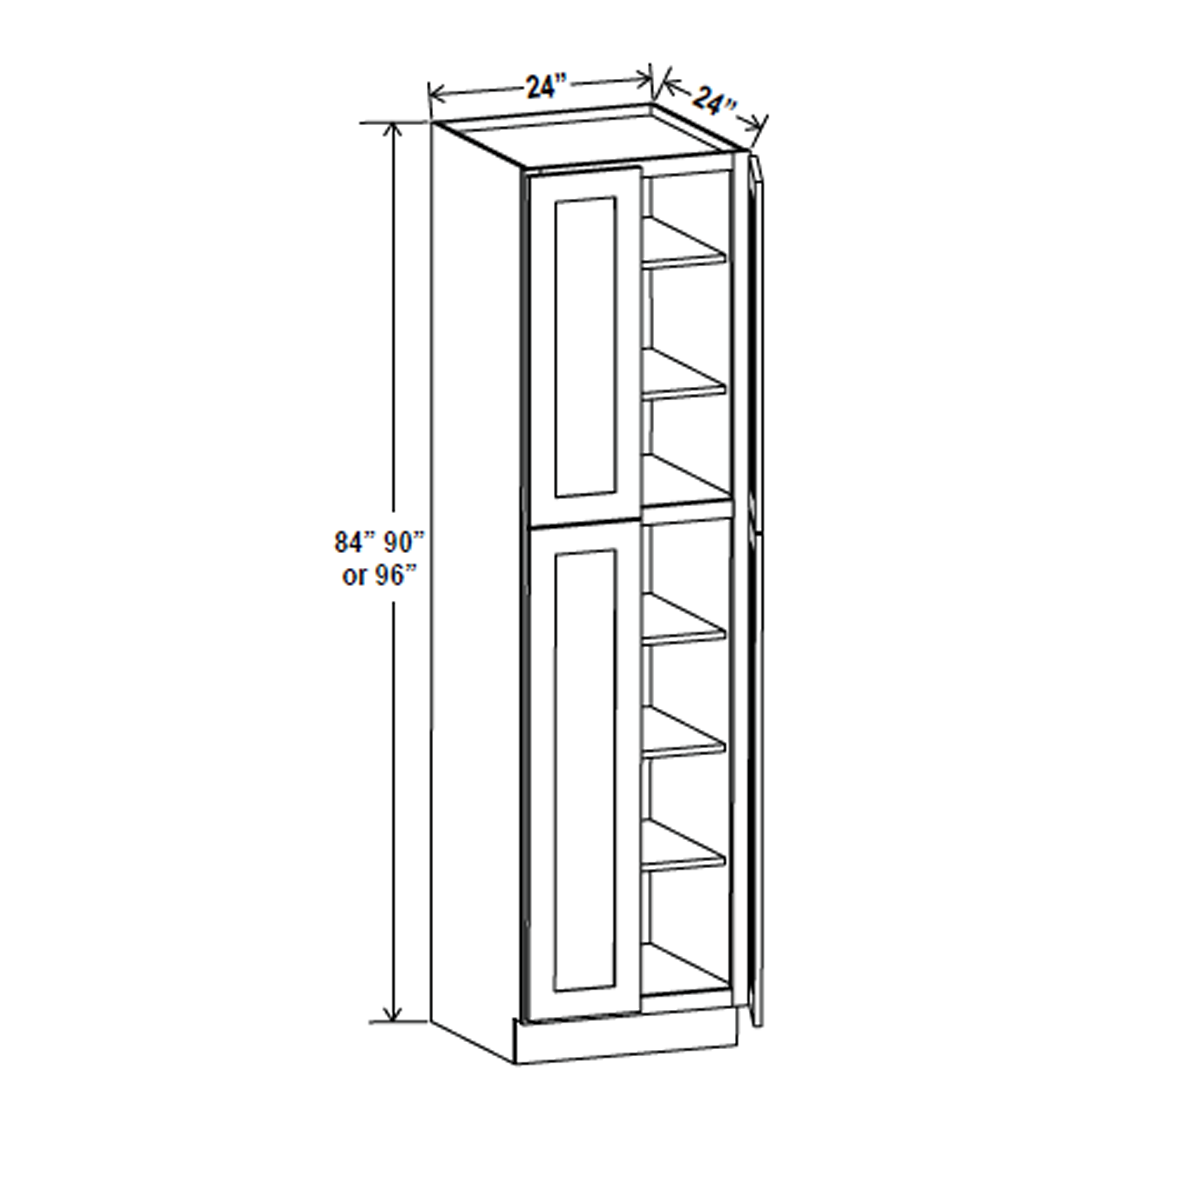 Wall Pantry Cabinet - 24W x 90H x 24D - Aria White Shaker - RTA